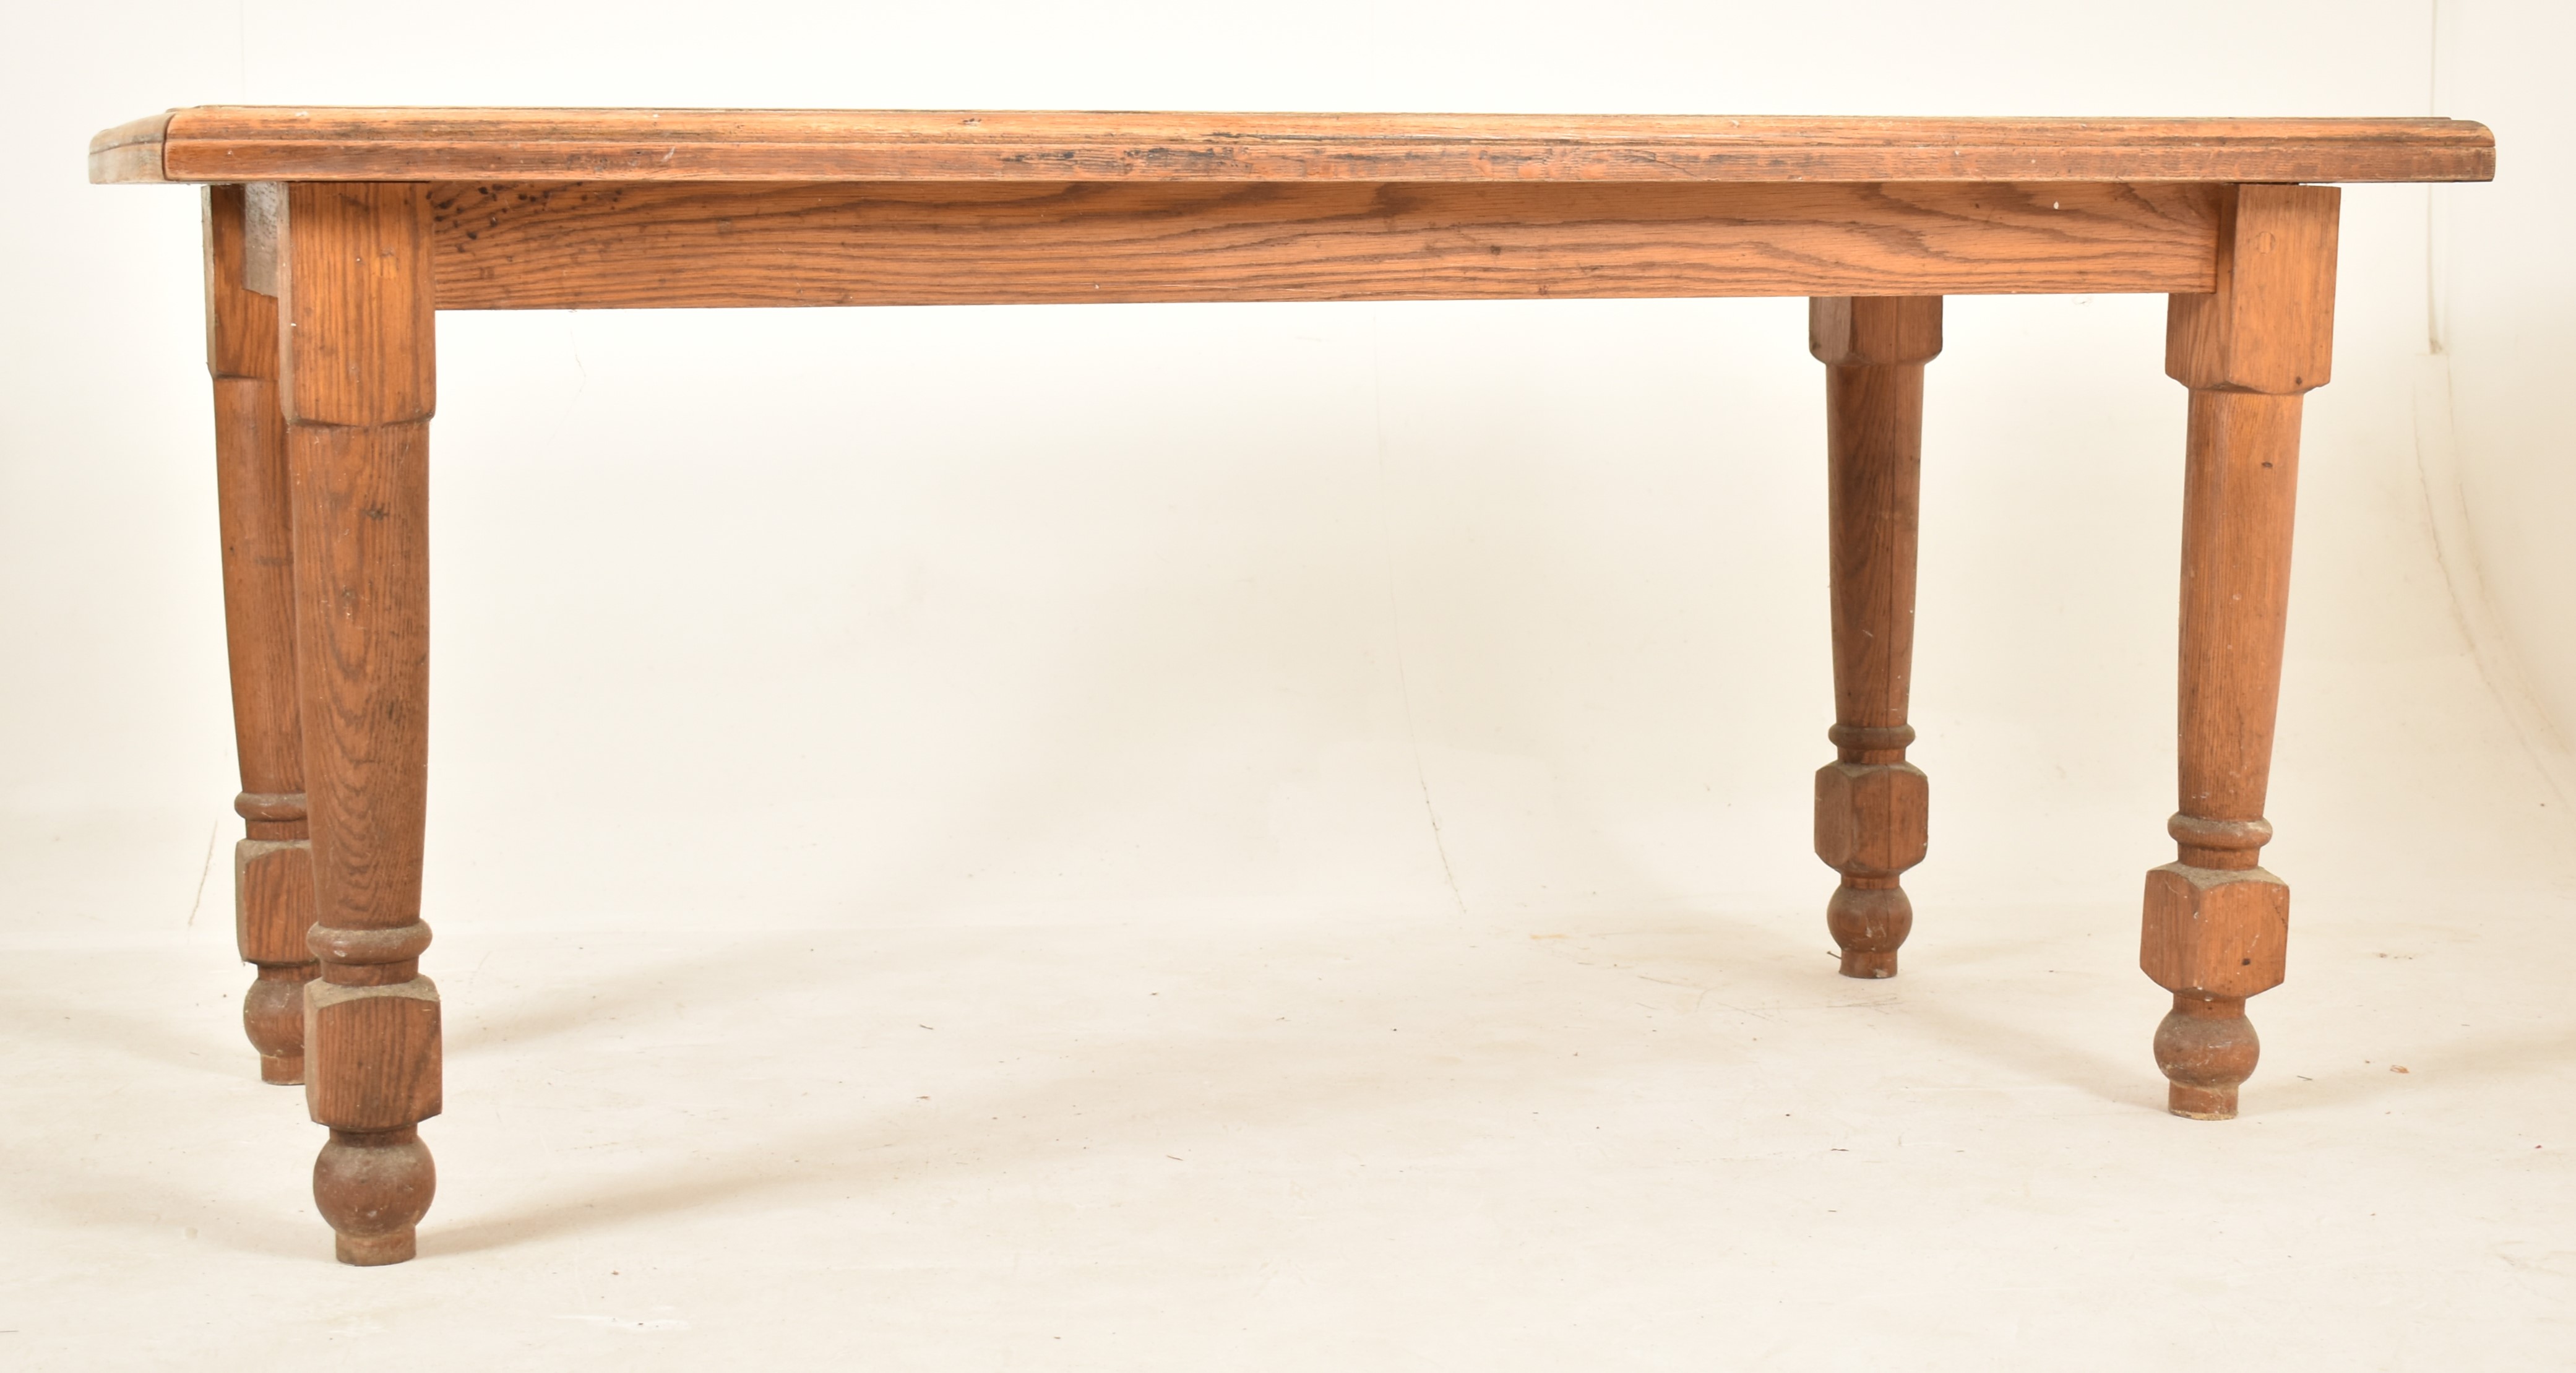 EARLY 20TH CENTURY OAK REFECTORY DINING TABLE - Image 5 of 5